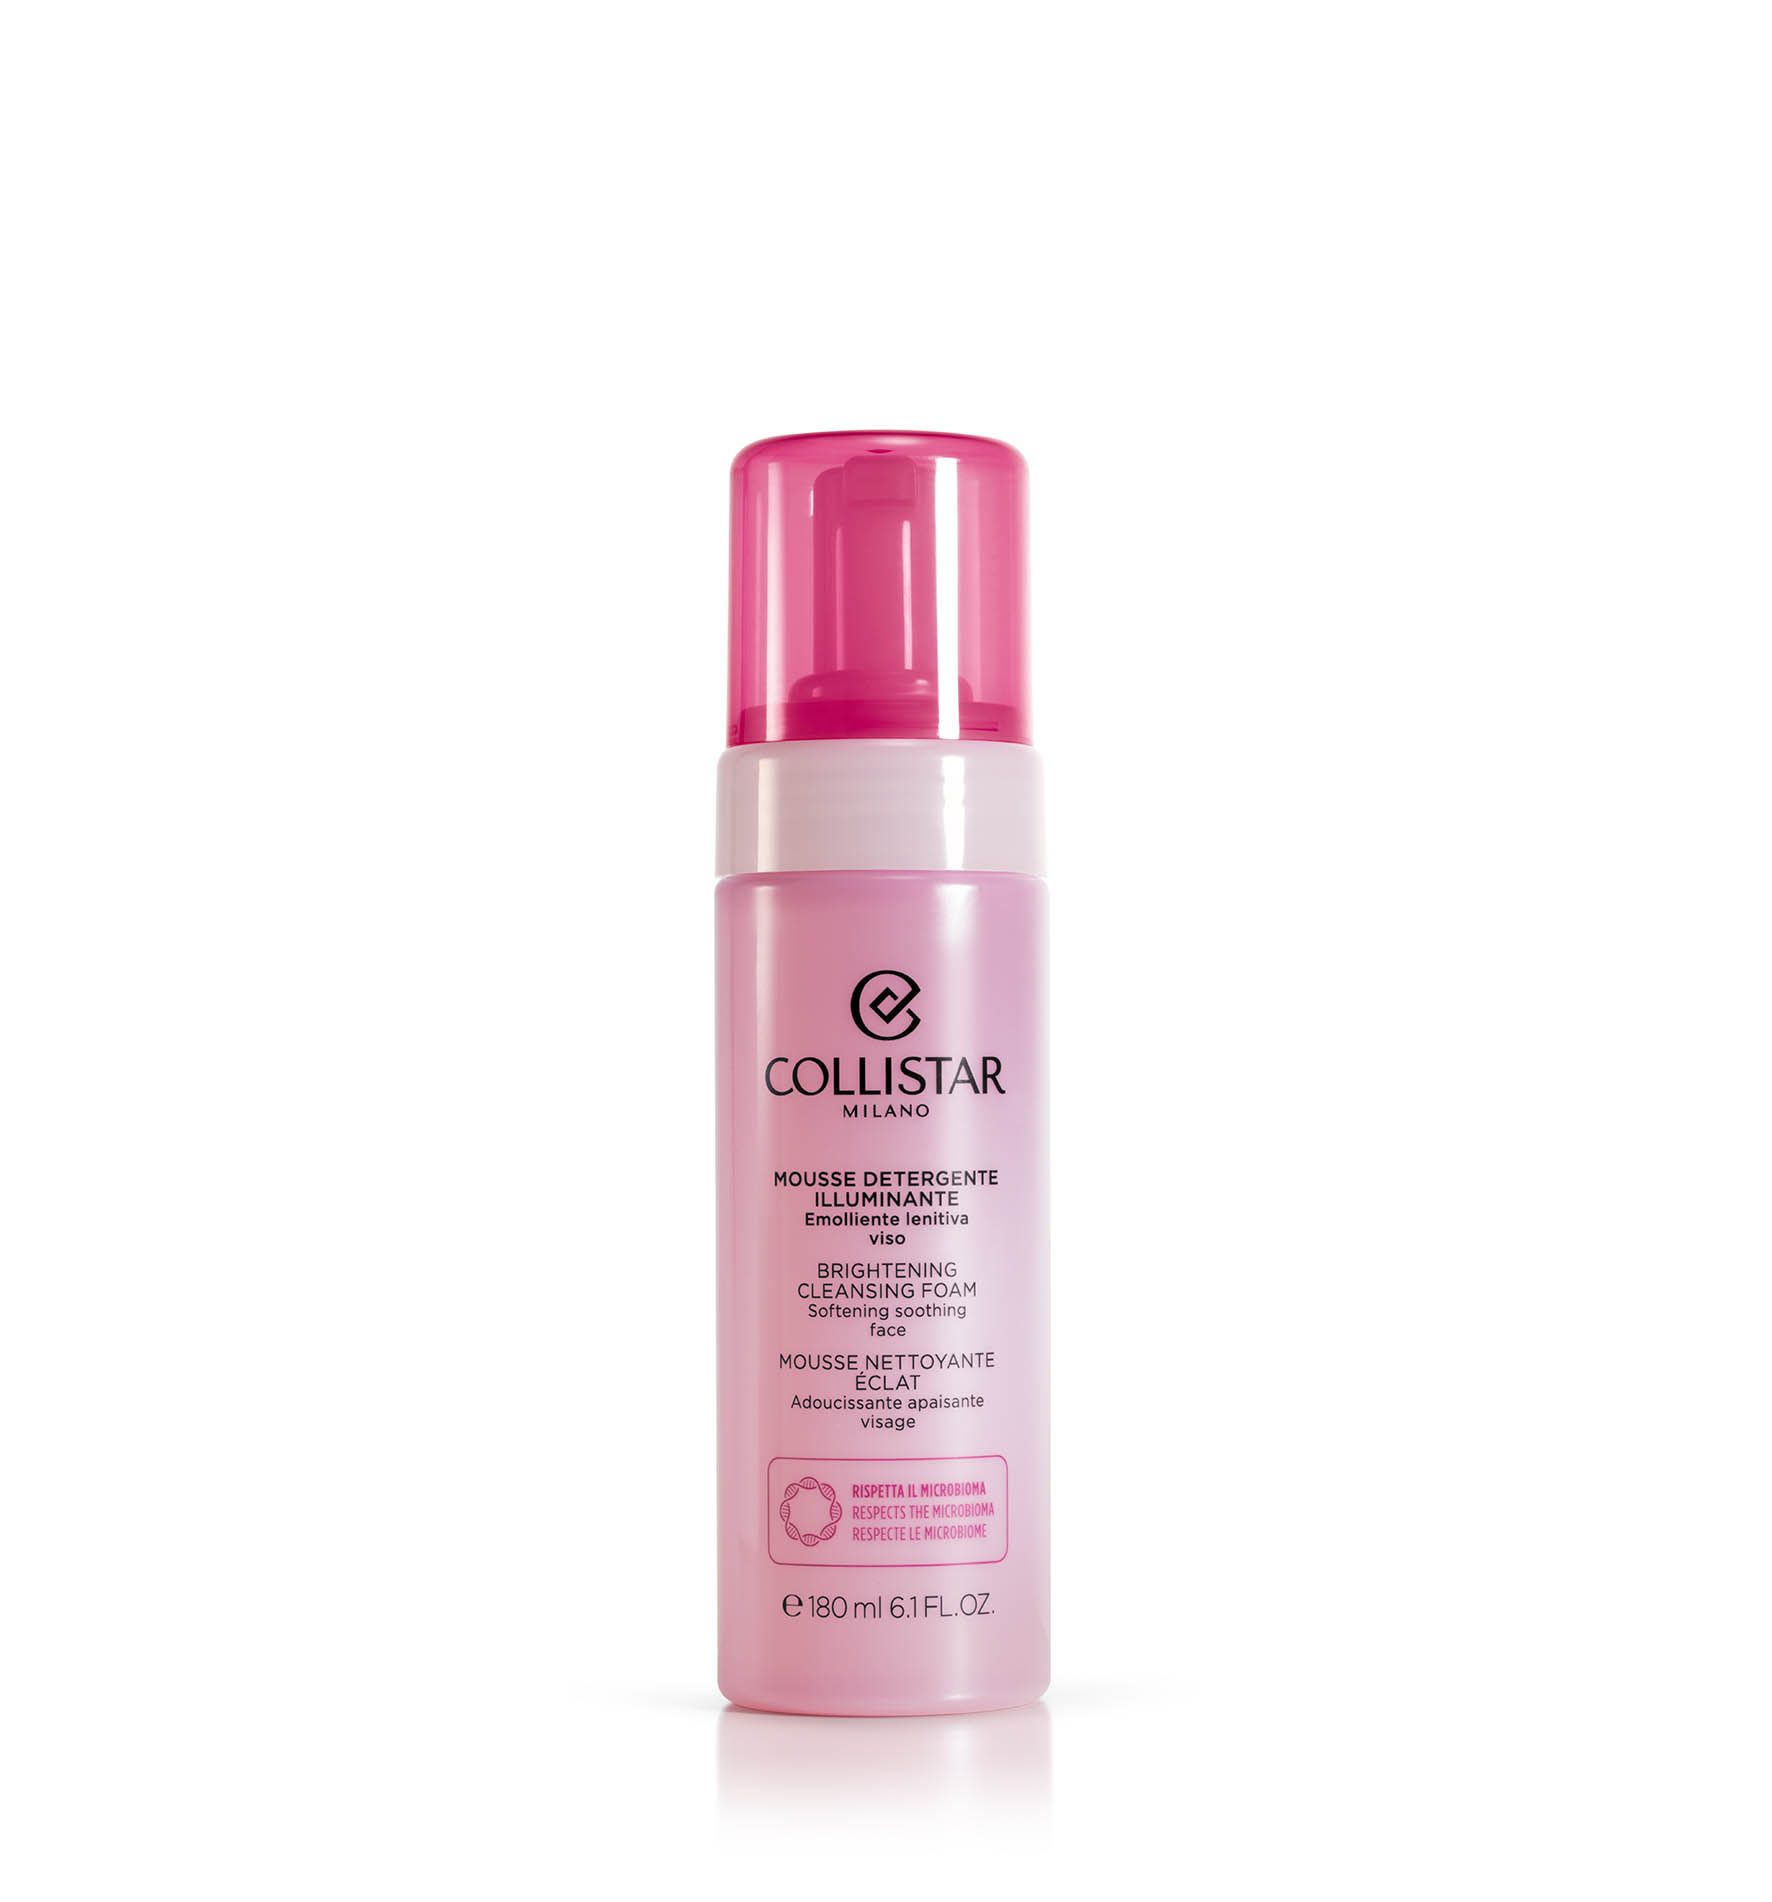 BRIGHTENING CLEANSING FOAM - For her | Collistar - Shop Online Ufficiale